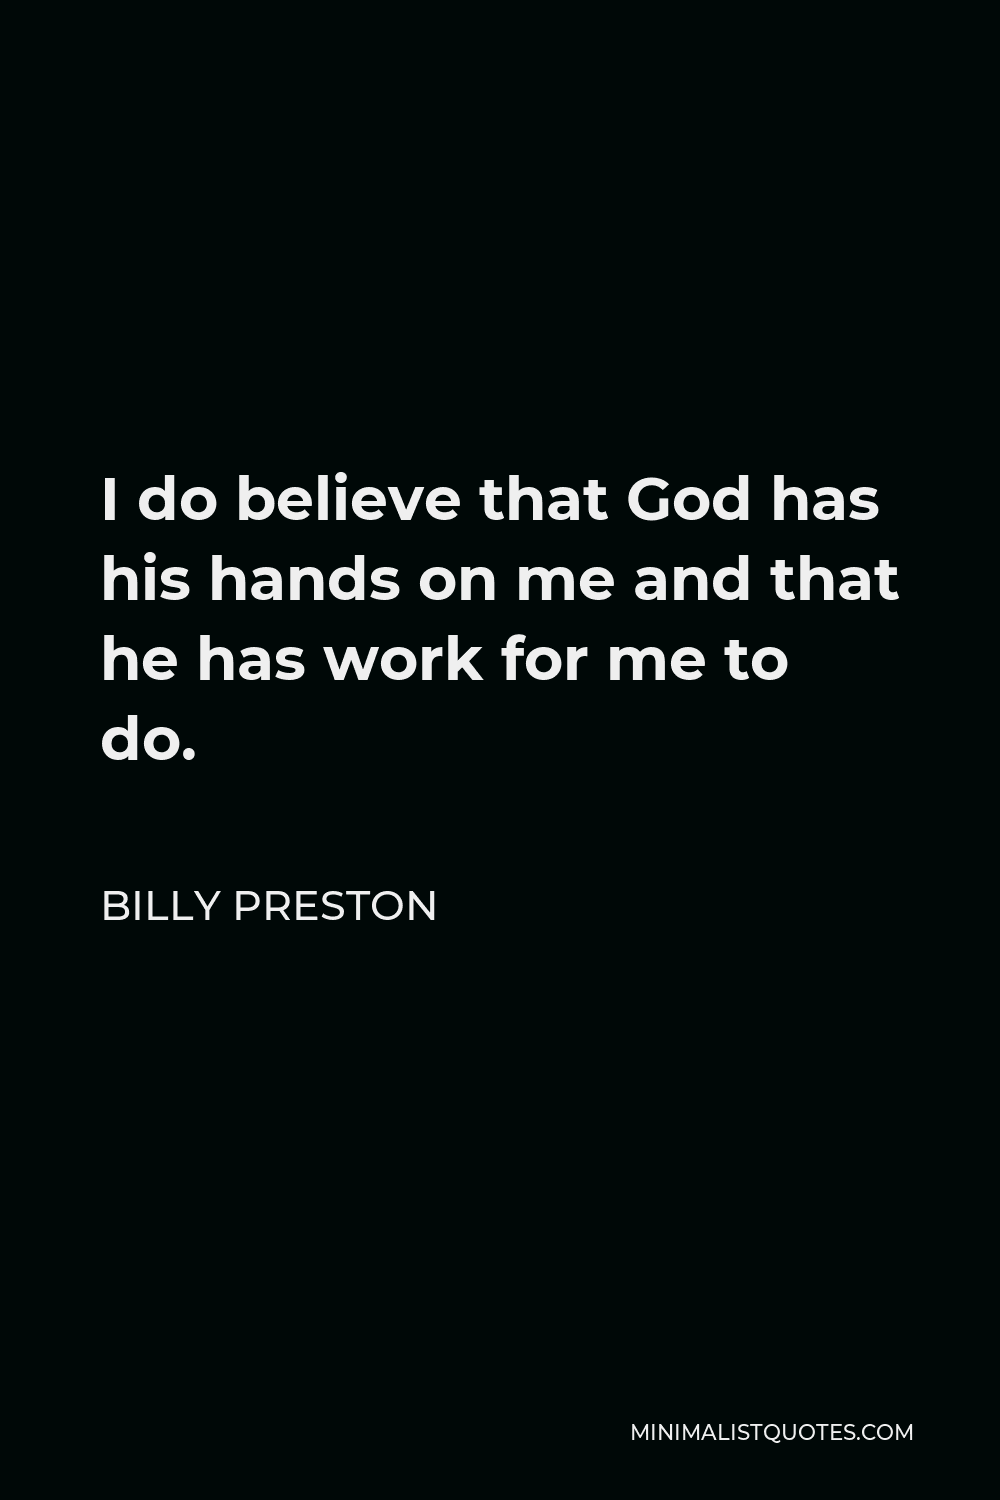 Billy Preston Quote - I do believe that God has his hands on me and that he has work for me to do.